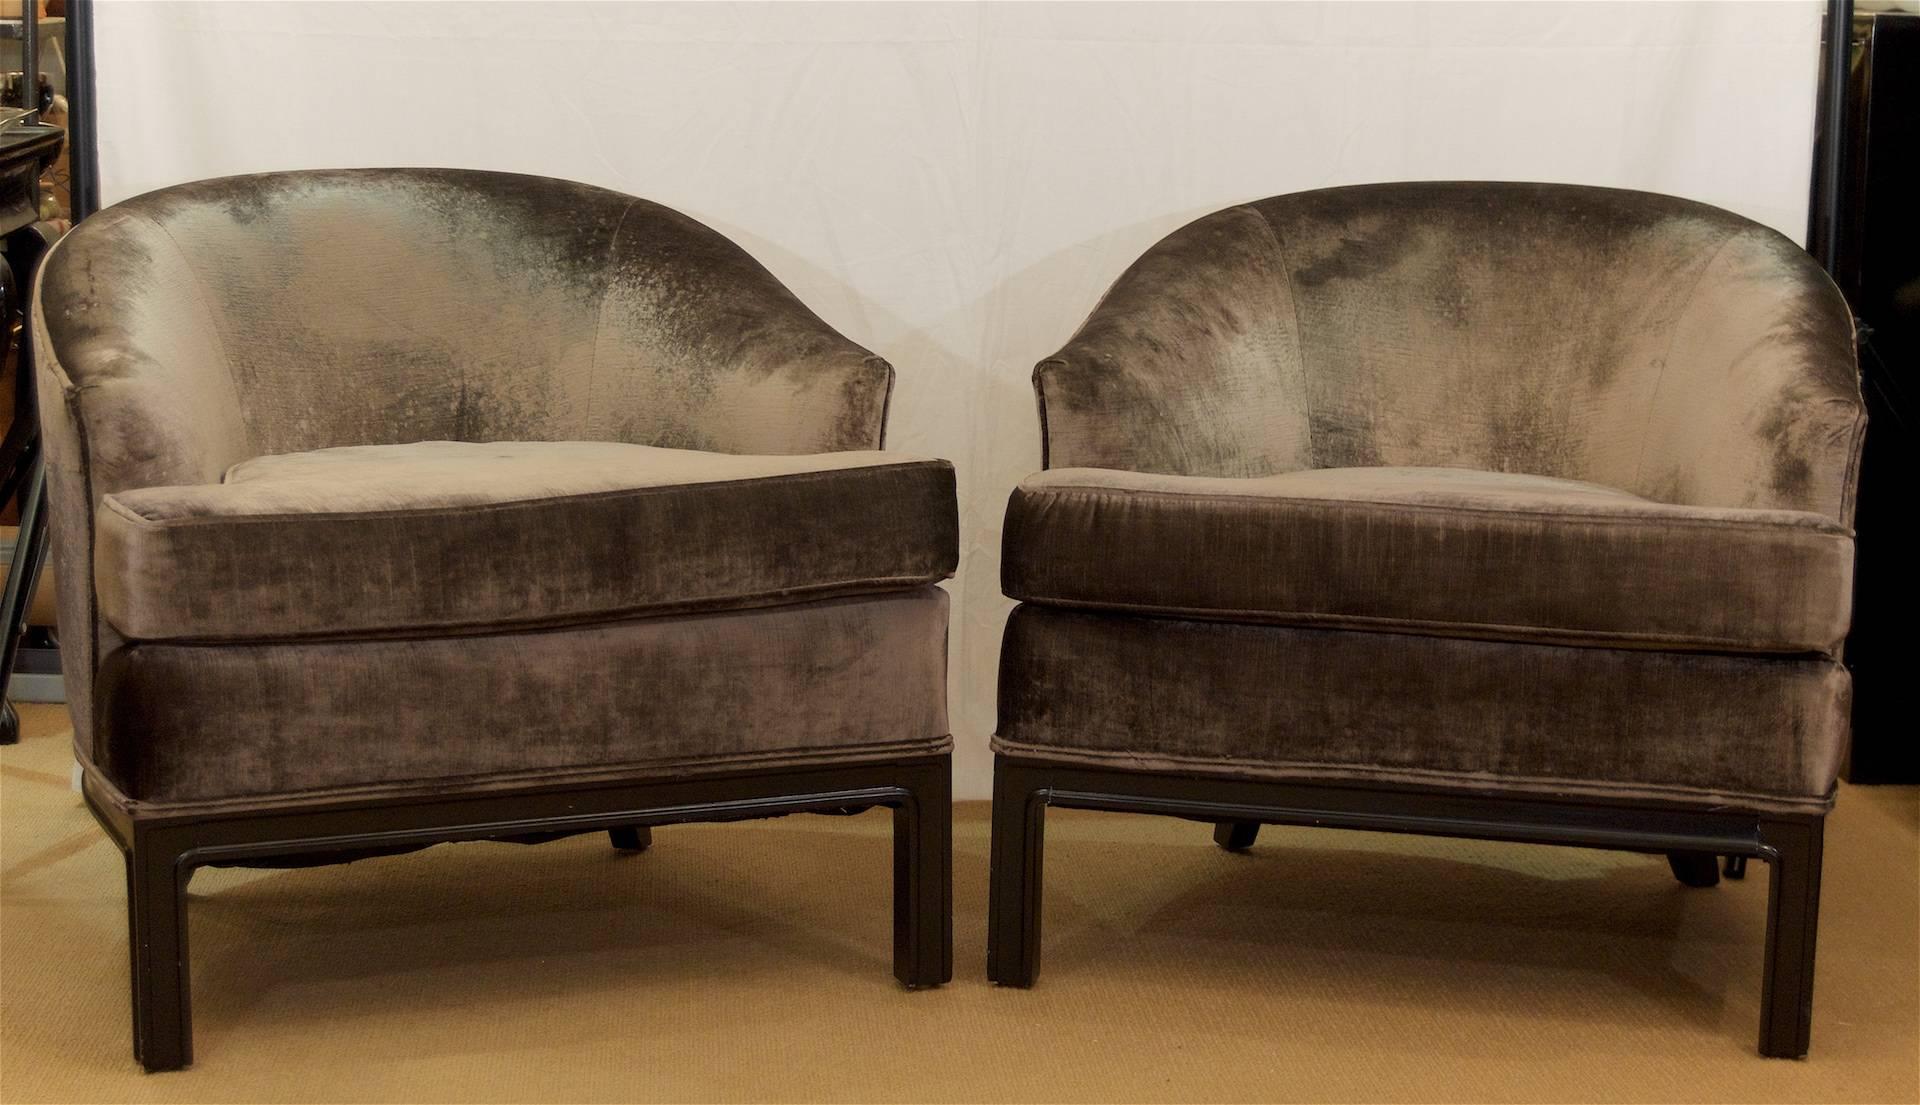 Elegantly shaped pair of American midcentury club chairs, newly reupholstered in a moleskin-tone brown-grey velvet, the bases newly lacquered in satin black. Extremely comfortable.